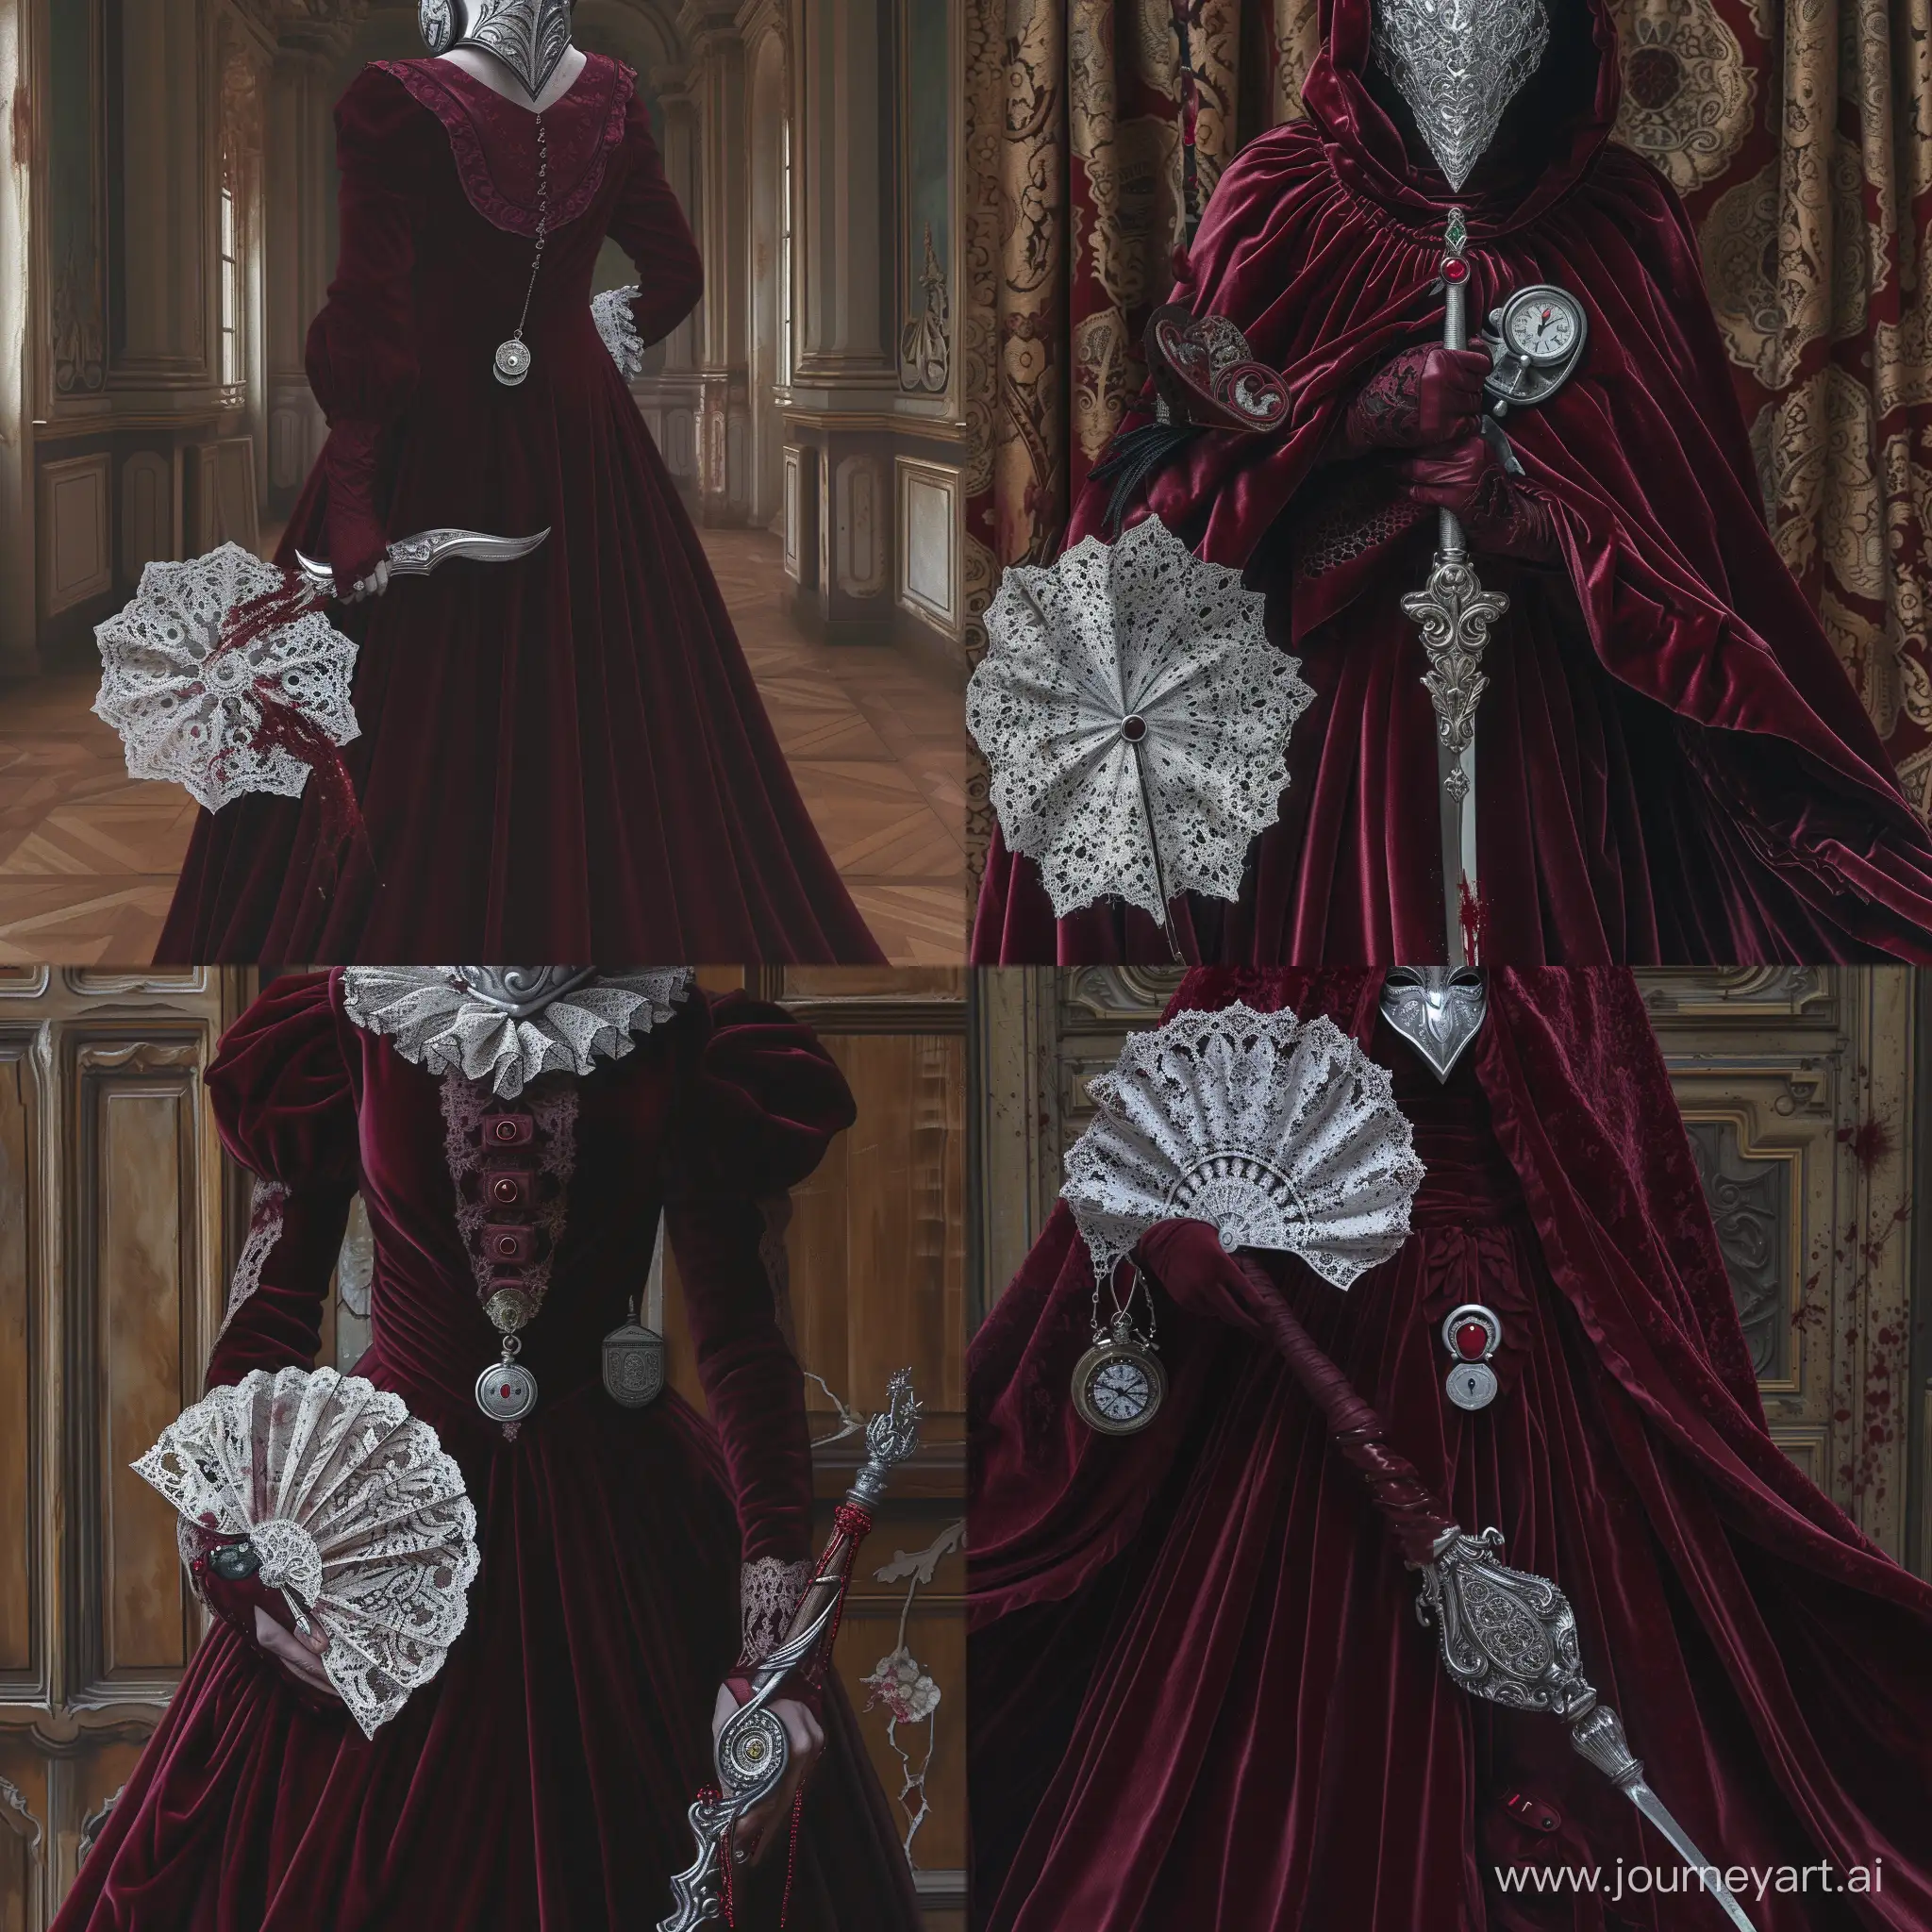 In the opulent halls of Hemwick Charnel Lane, the Crimson Veil Wraith glides gracefully. The burgundy velvet gown swirls as the silver masquerade mask hints at secrets whispered among the ghosts that haunt the abandoned manor, A delicate lace hand fan, a silver locket with a red gemstone, and a pocket watch, wielding an elegantly crafted dagger with a hilt resembling intertwining vines, emitting an otherworldly presence, 1970's dark fantasy style, bloodborne style, gritty, detailed, dark, blood on weapons